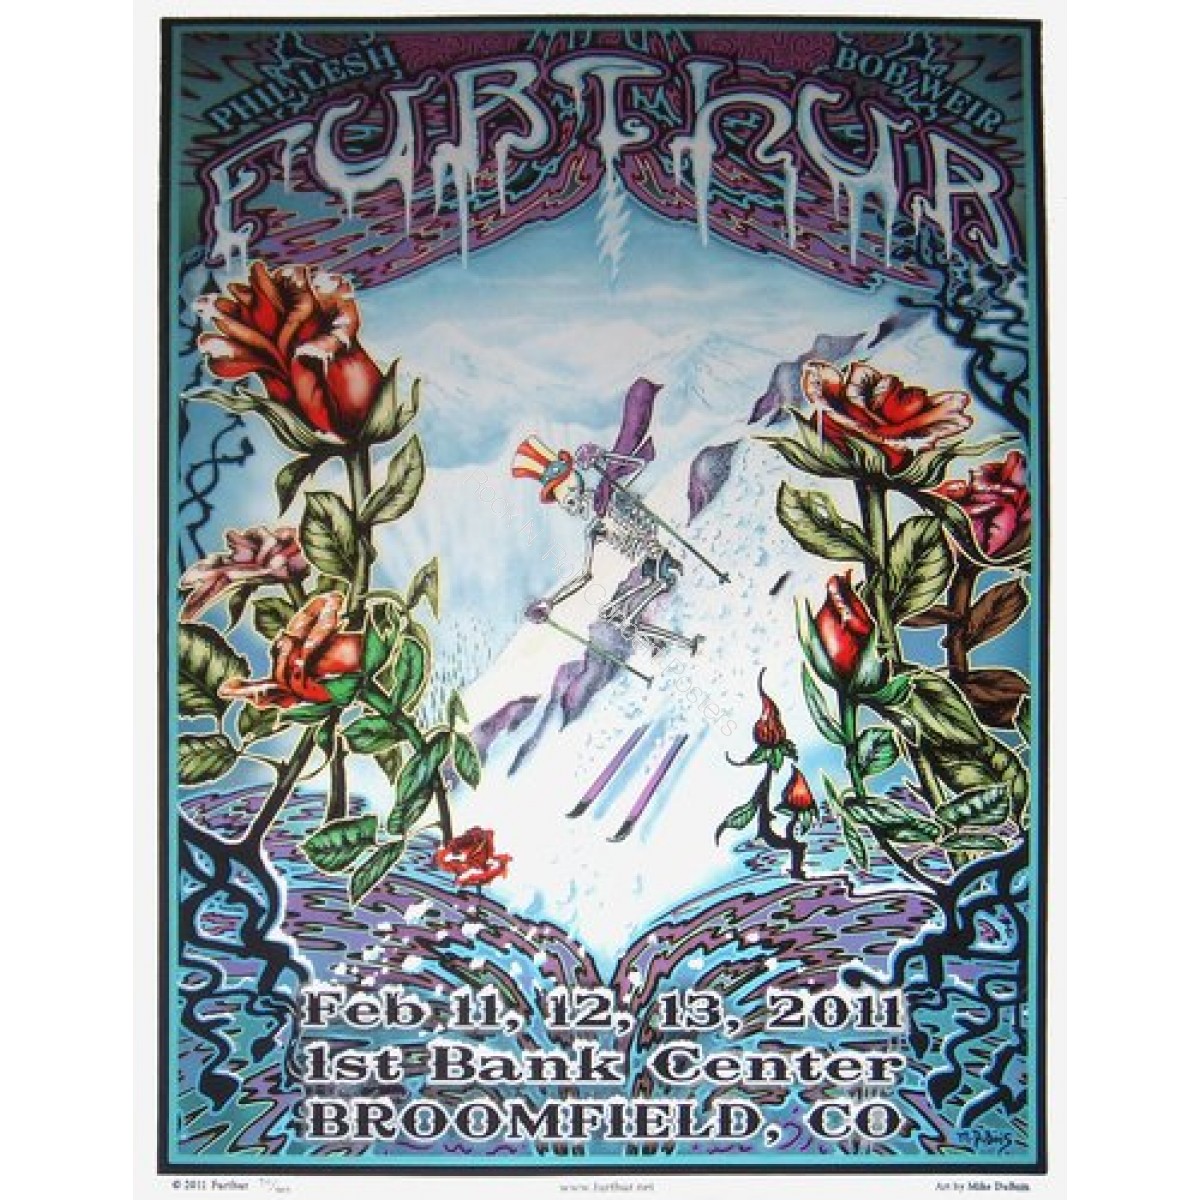 Furthur Grateful Dead @ 1st Bank Center Broomfield Colorado February 11,12,13 2011 Official 1st edition Poster Hand Numbered Edition of 600  Skeleton Skier